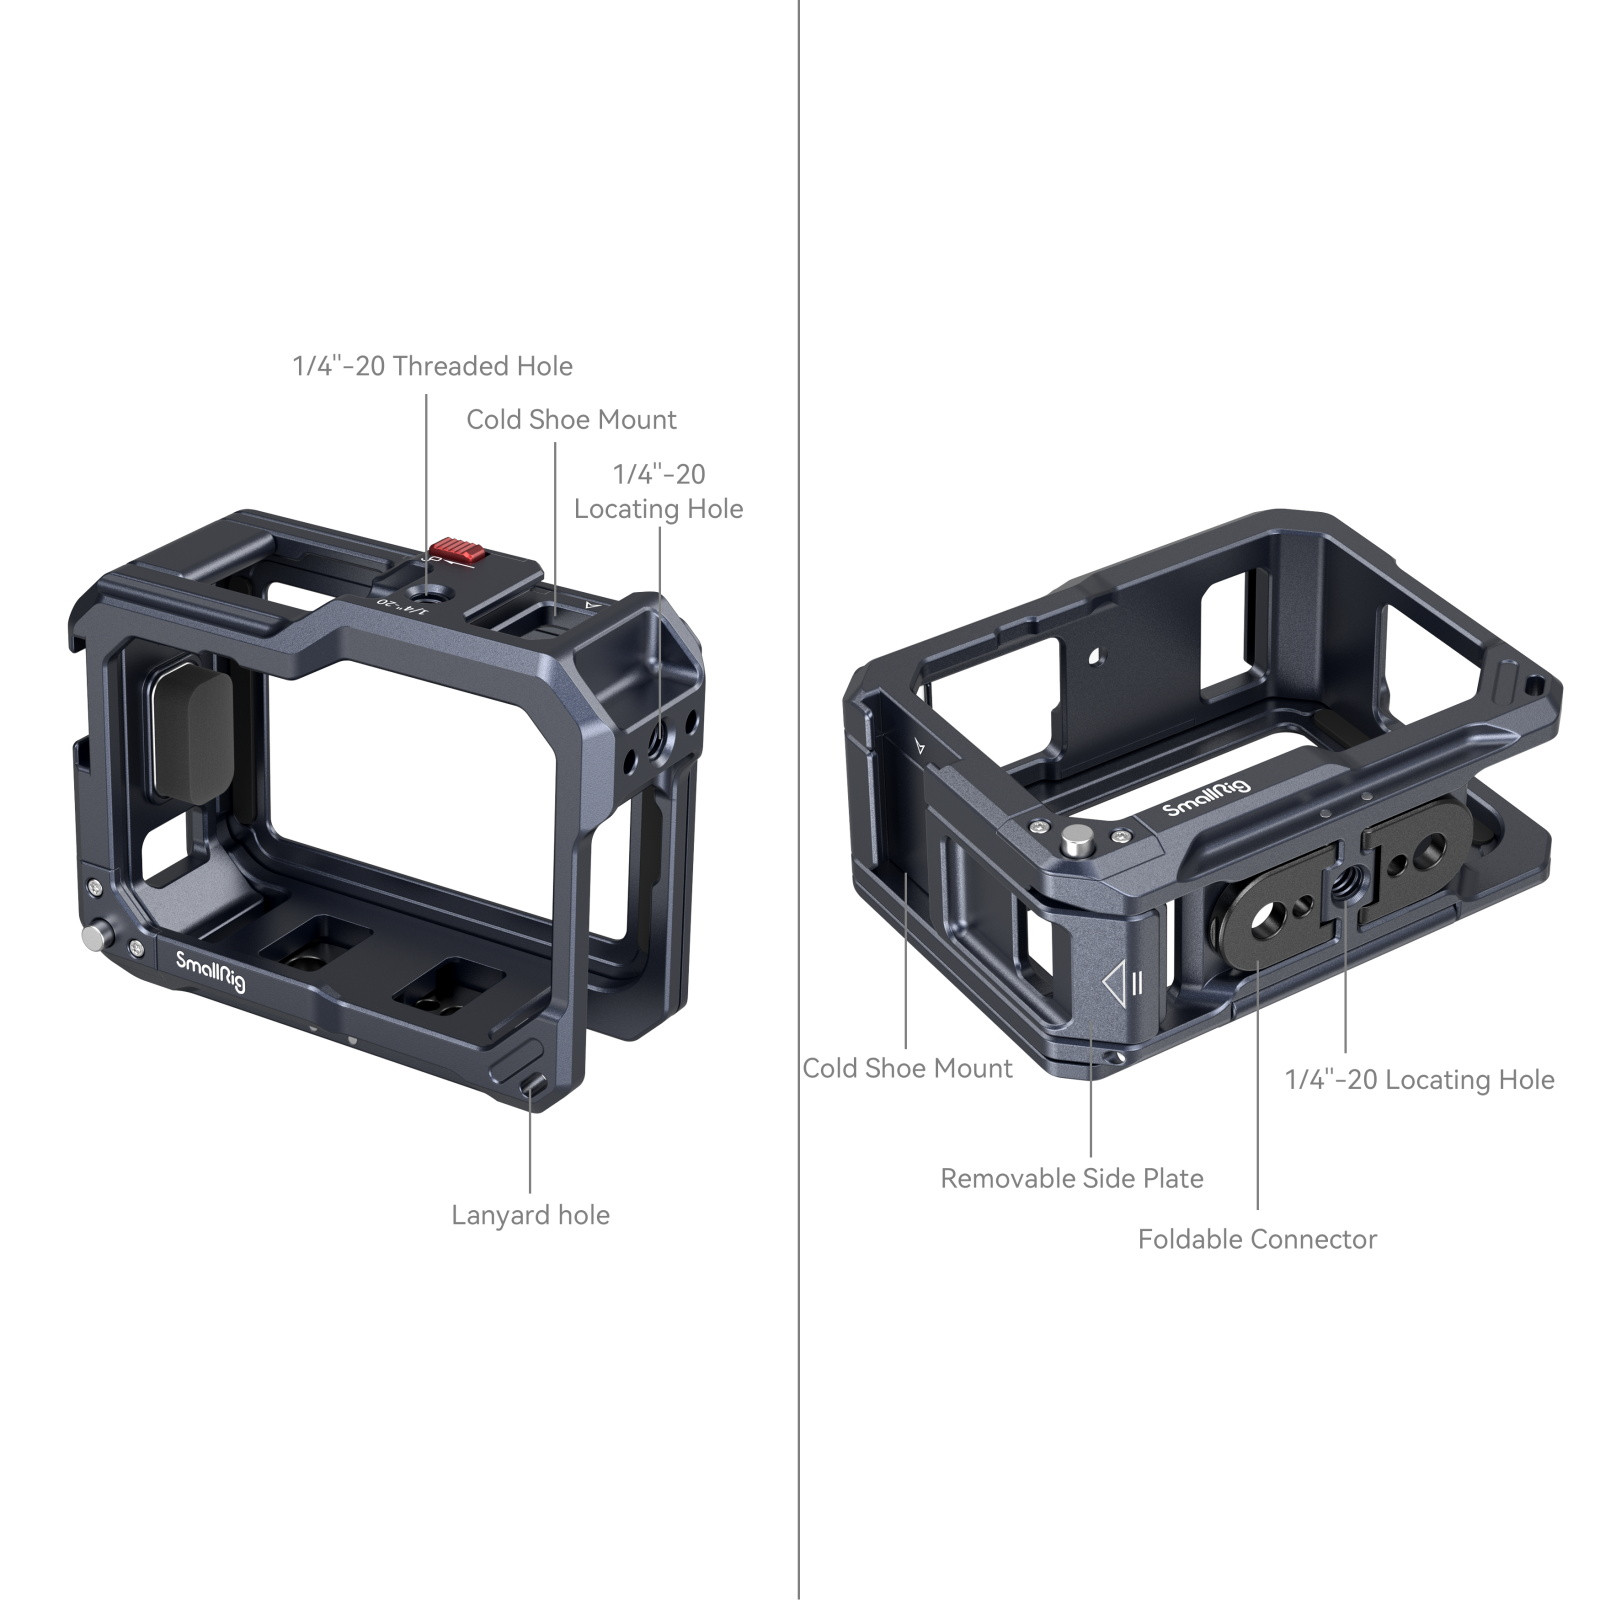  SmallRig Hero12 / Hero11 / Hero 10 / Hero 9 Black Cage for  GoPro, with 2 Cold Shoe Mount for GoPro Light Mod and Common Microphone,  Led Video Light - 3083C : Electronics